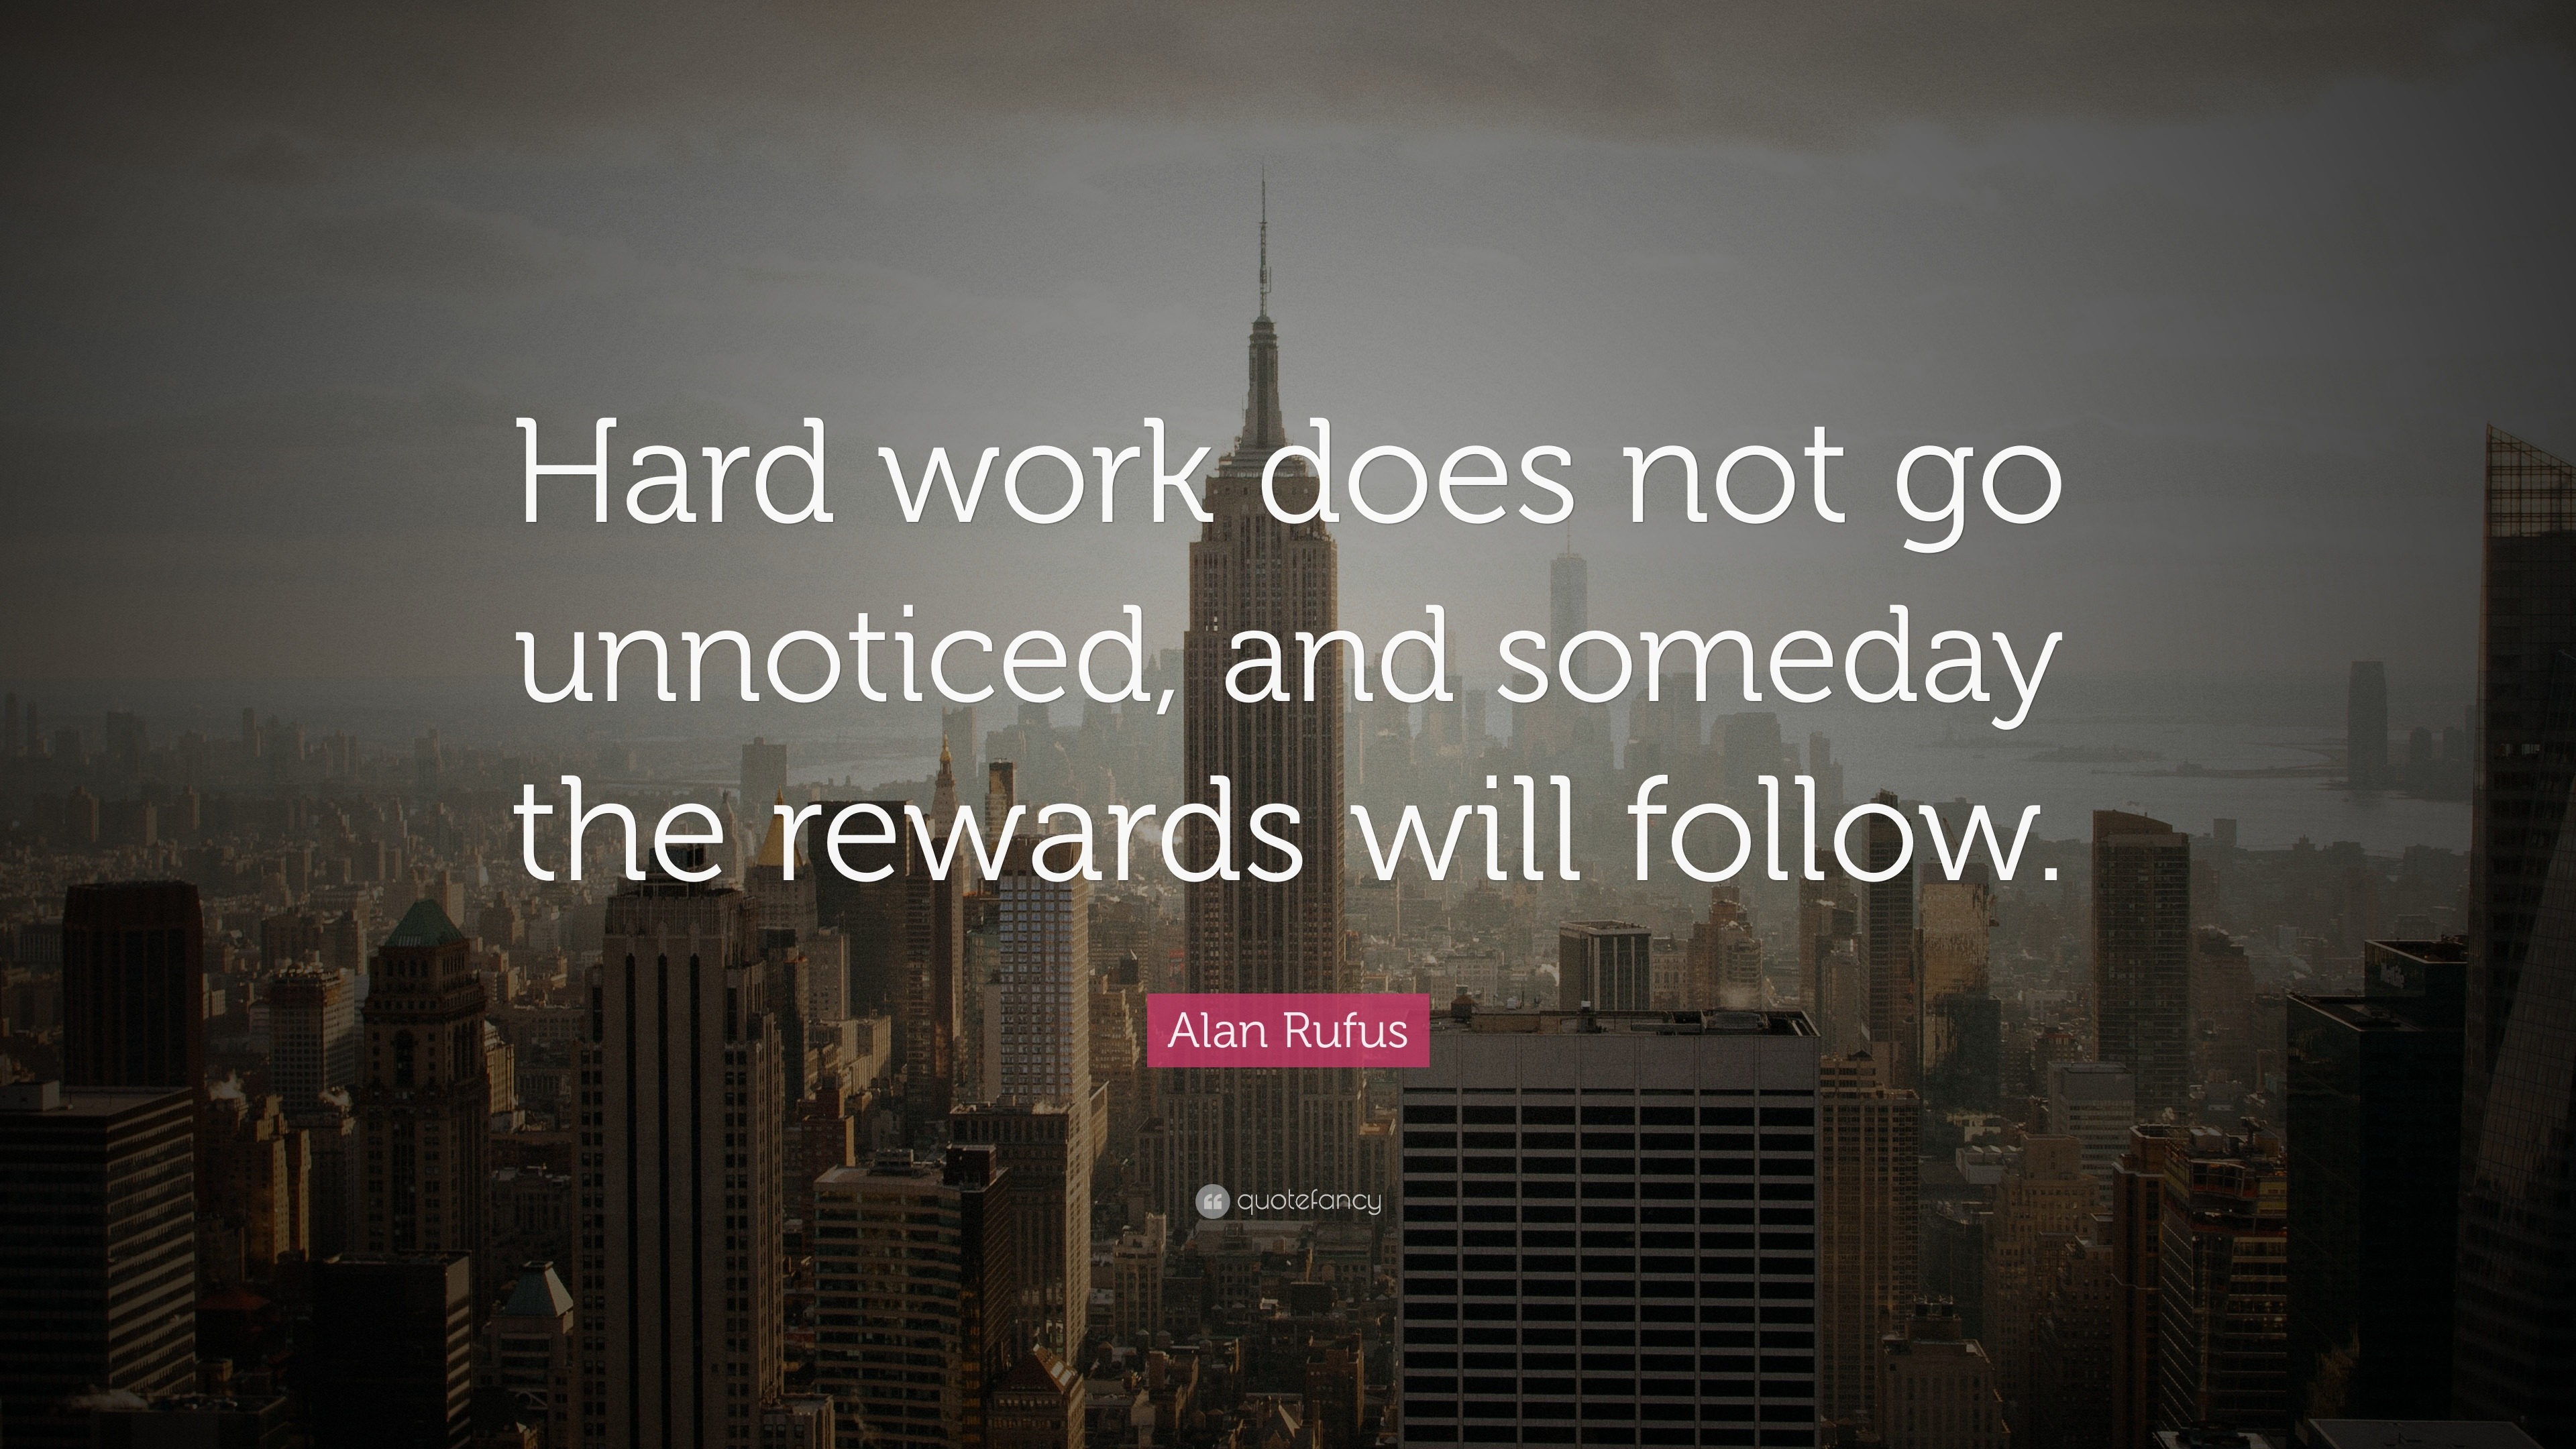 Alan Rufus Quote: “Hard work does not go unnoticed, and someday